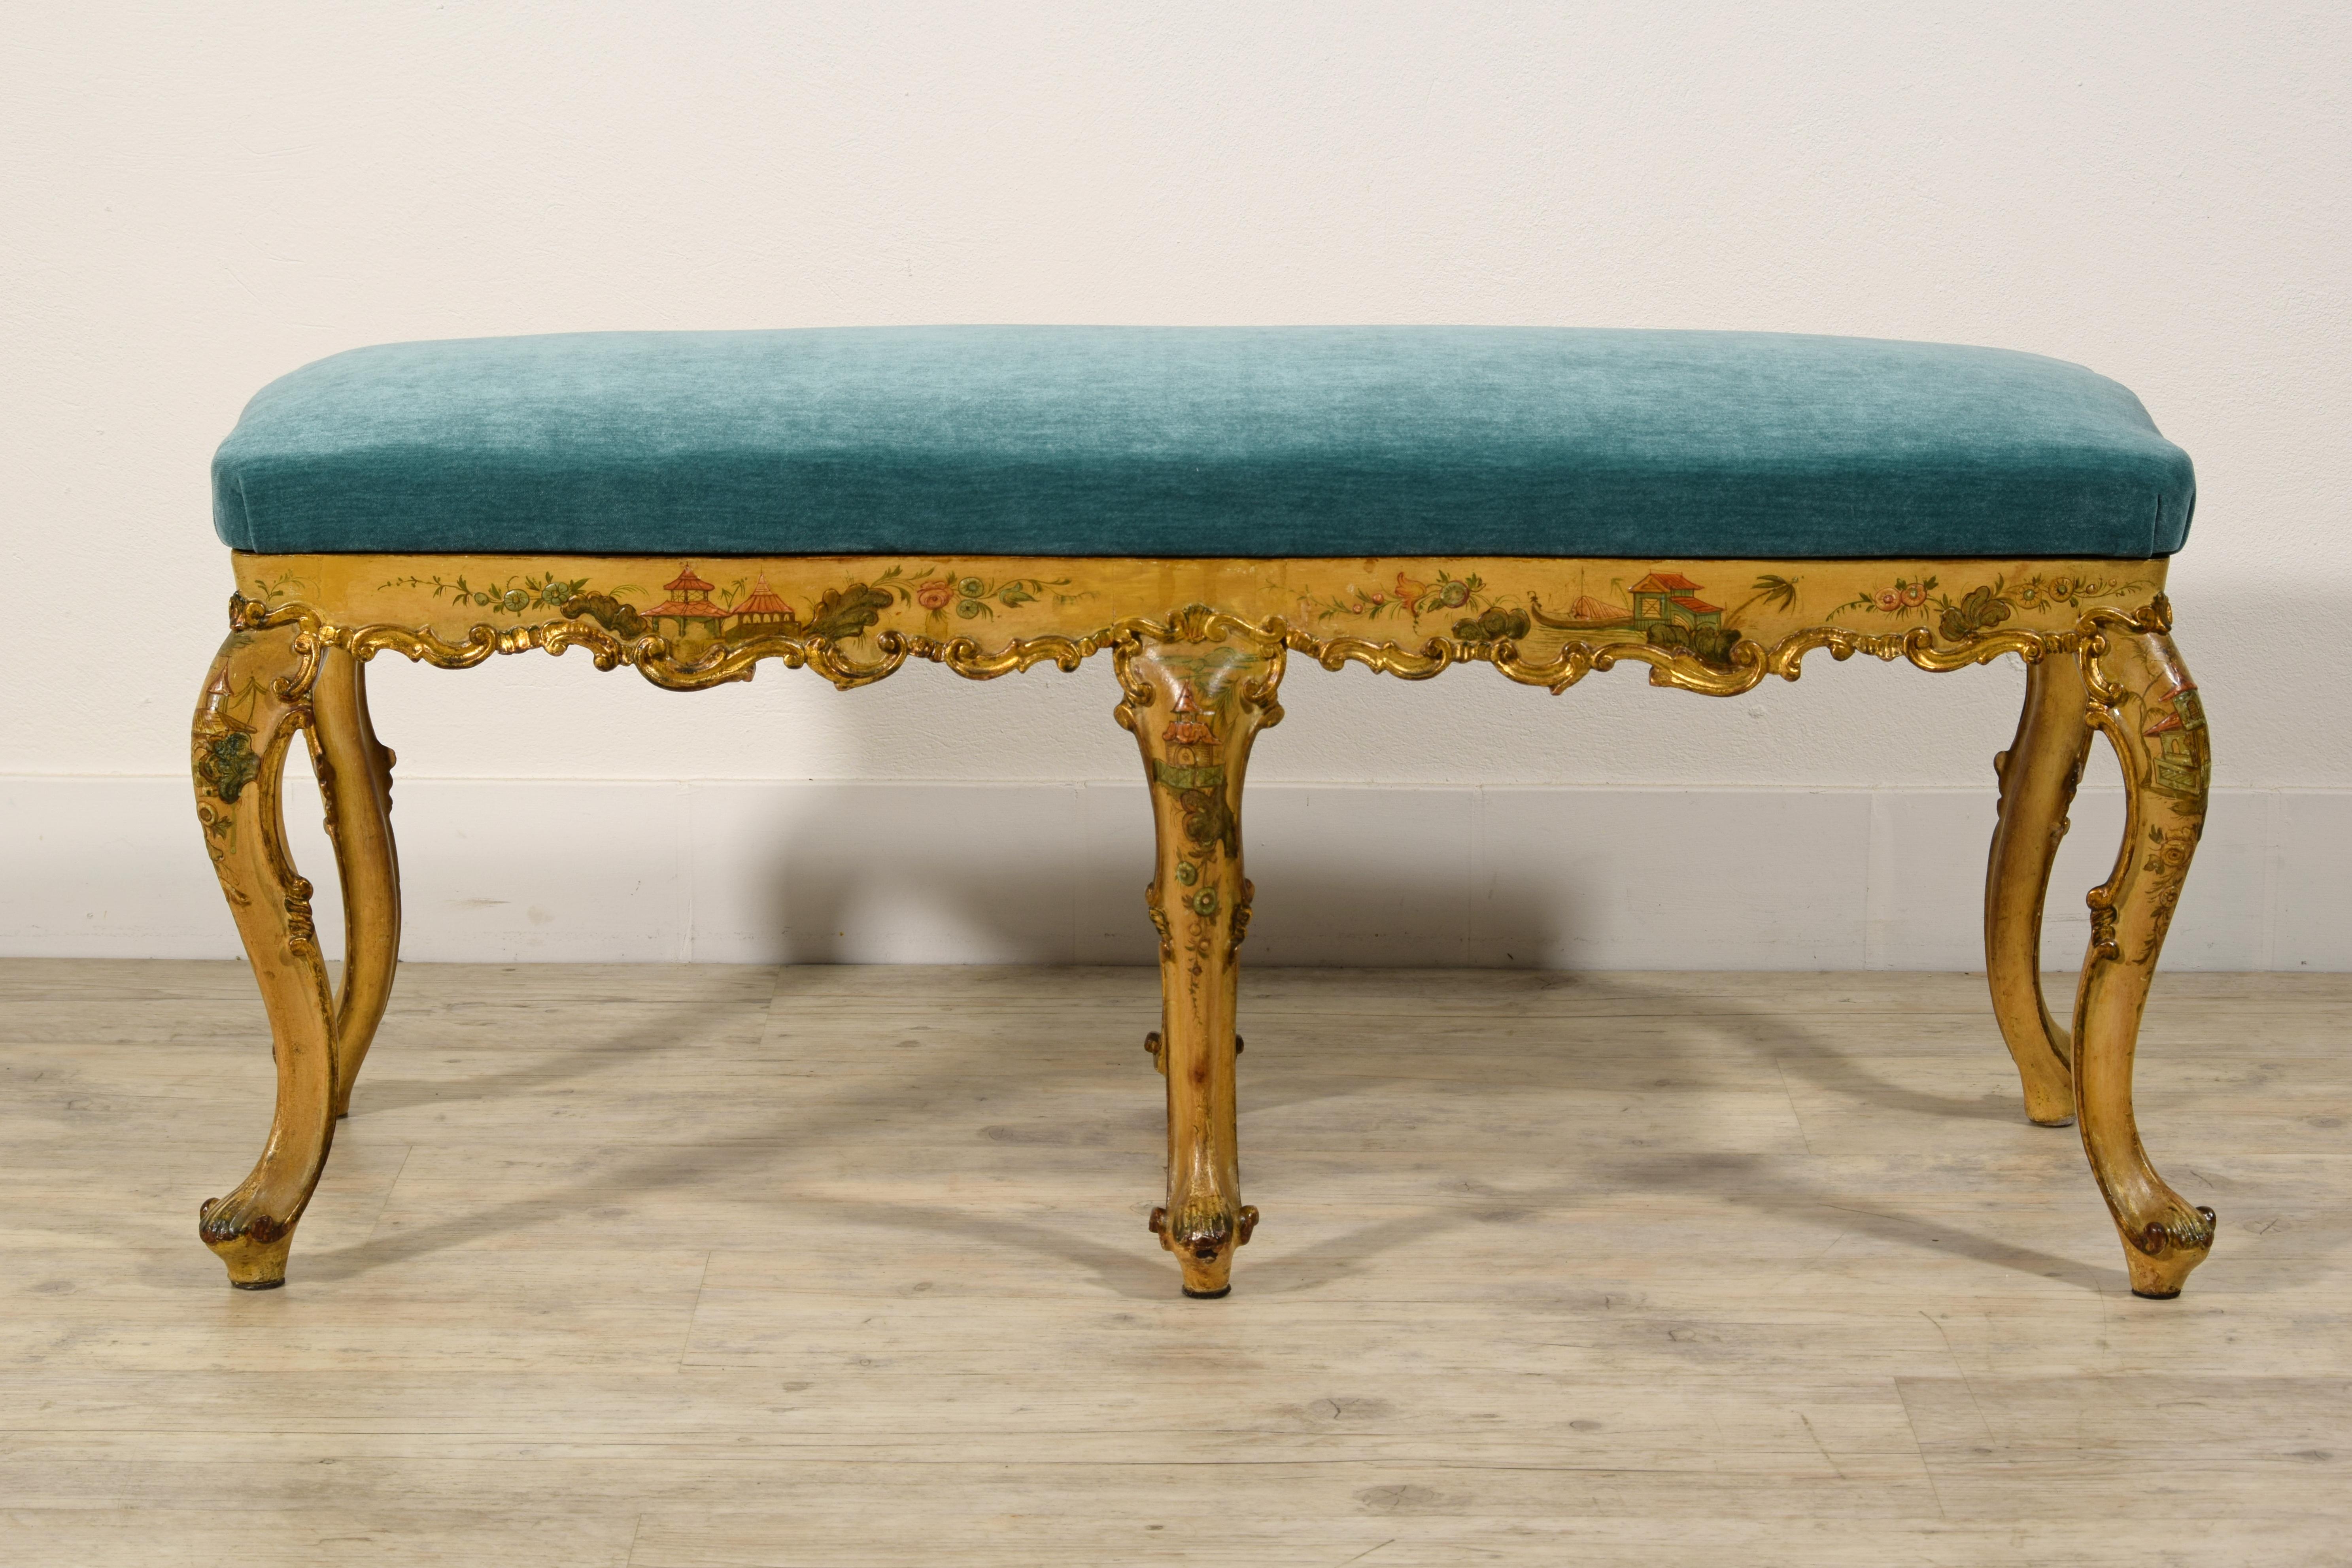 Italian 20th Century, Venetian Baroque Stile Carved and Laquered Giltwood Bench For Sale